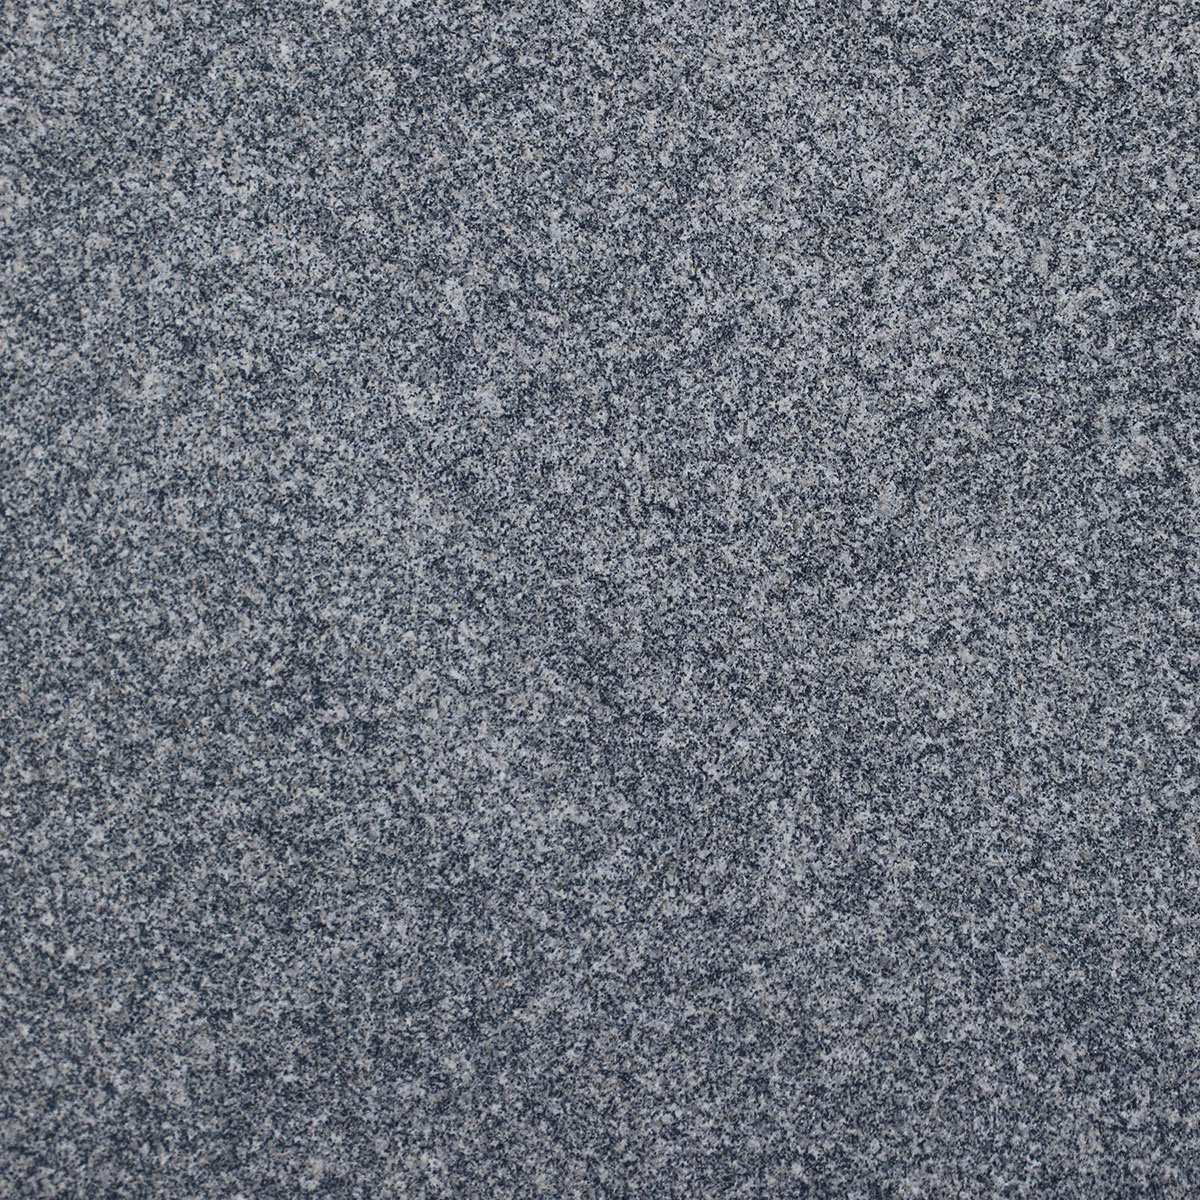 static/products/marbleSlabs/products/GG10.jpg 